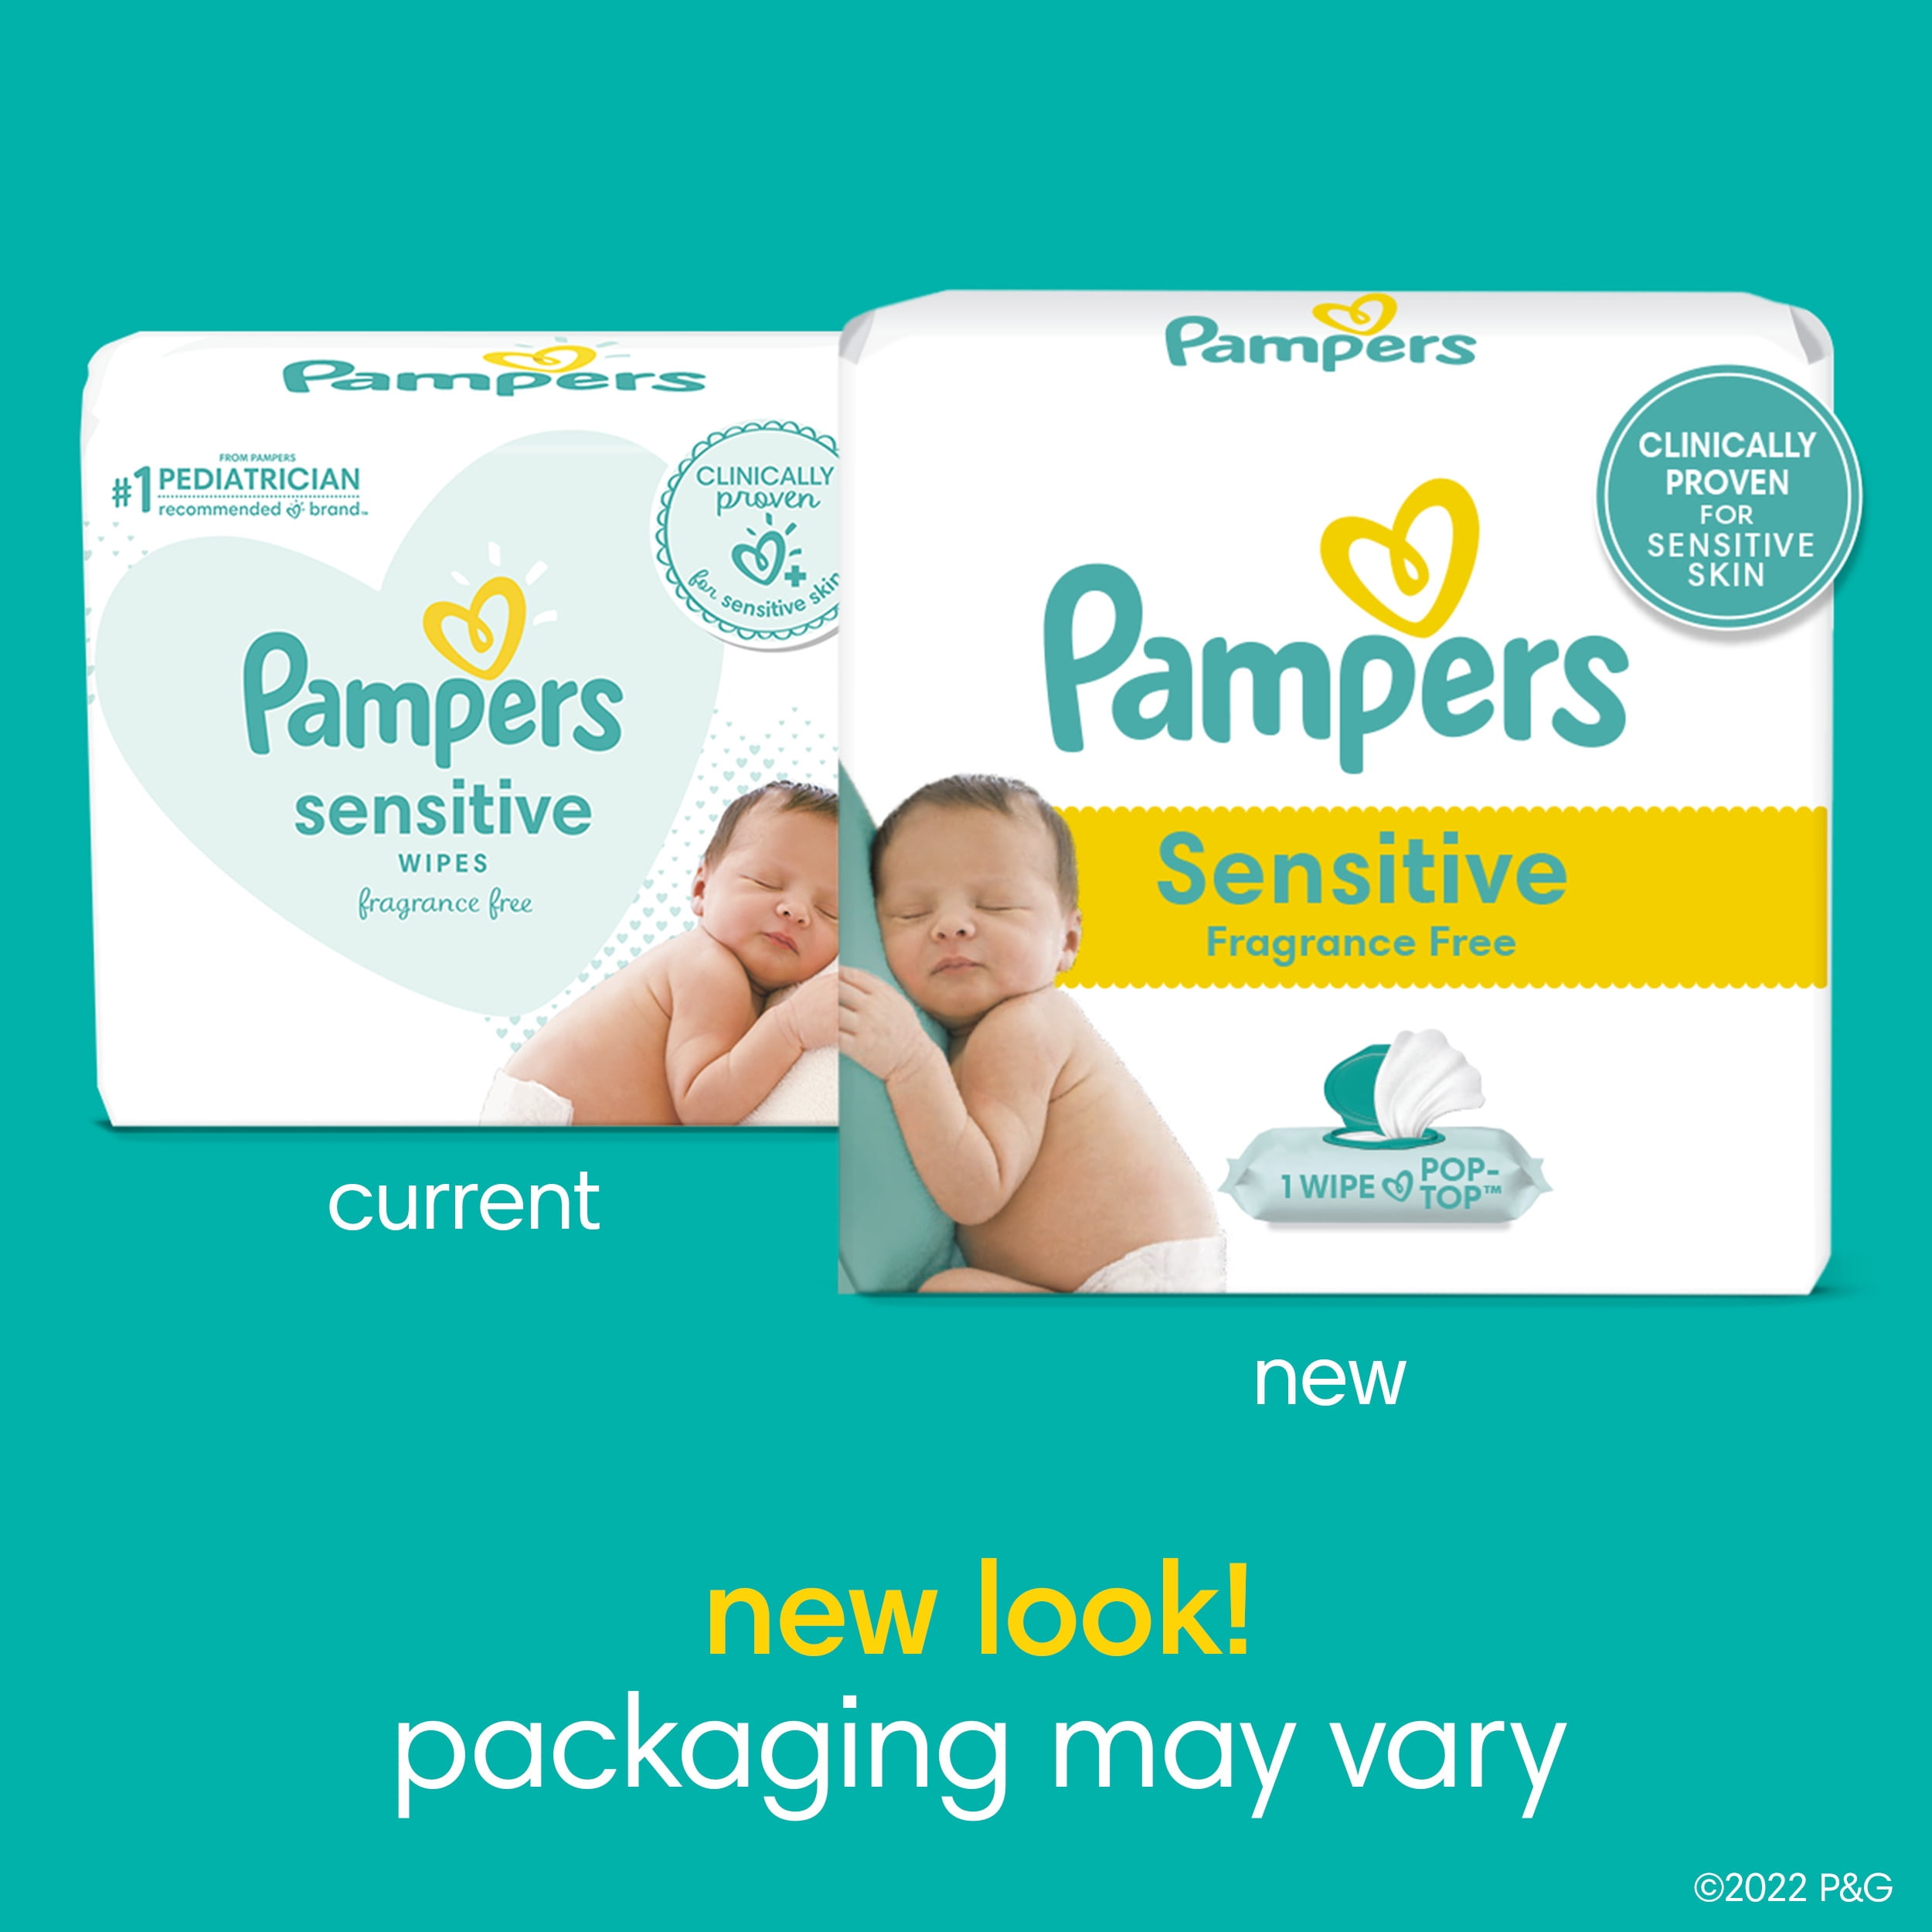 Pampers - 228 couches bébé Taille 0 procare premium protection